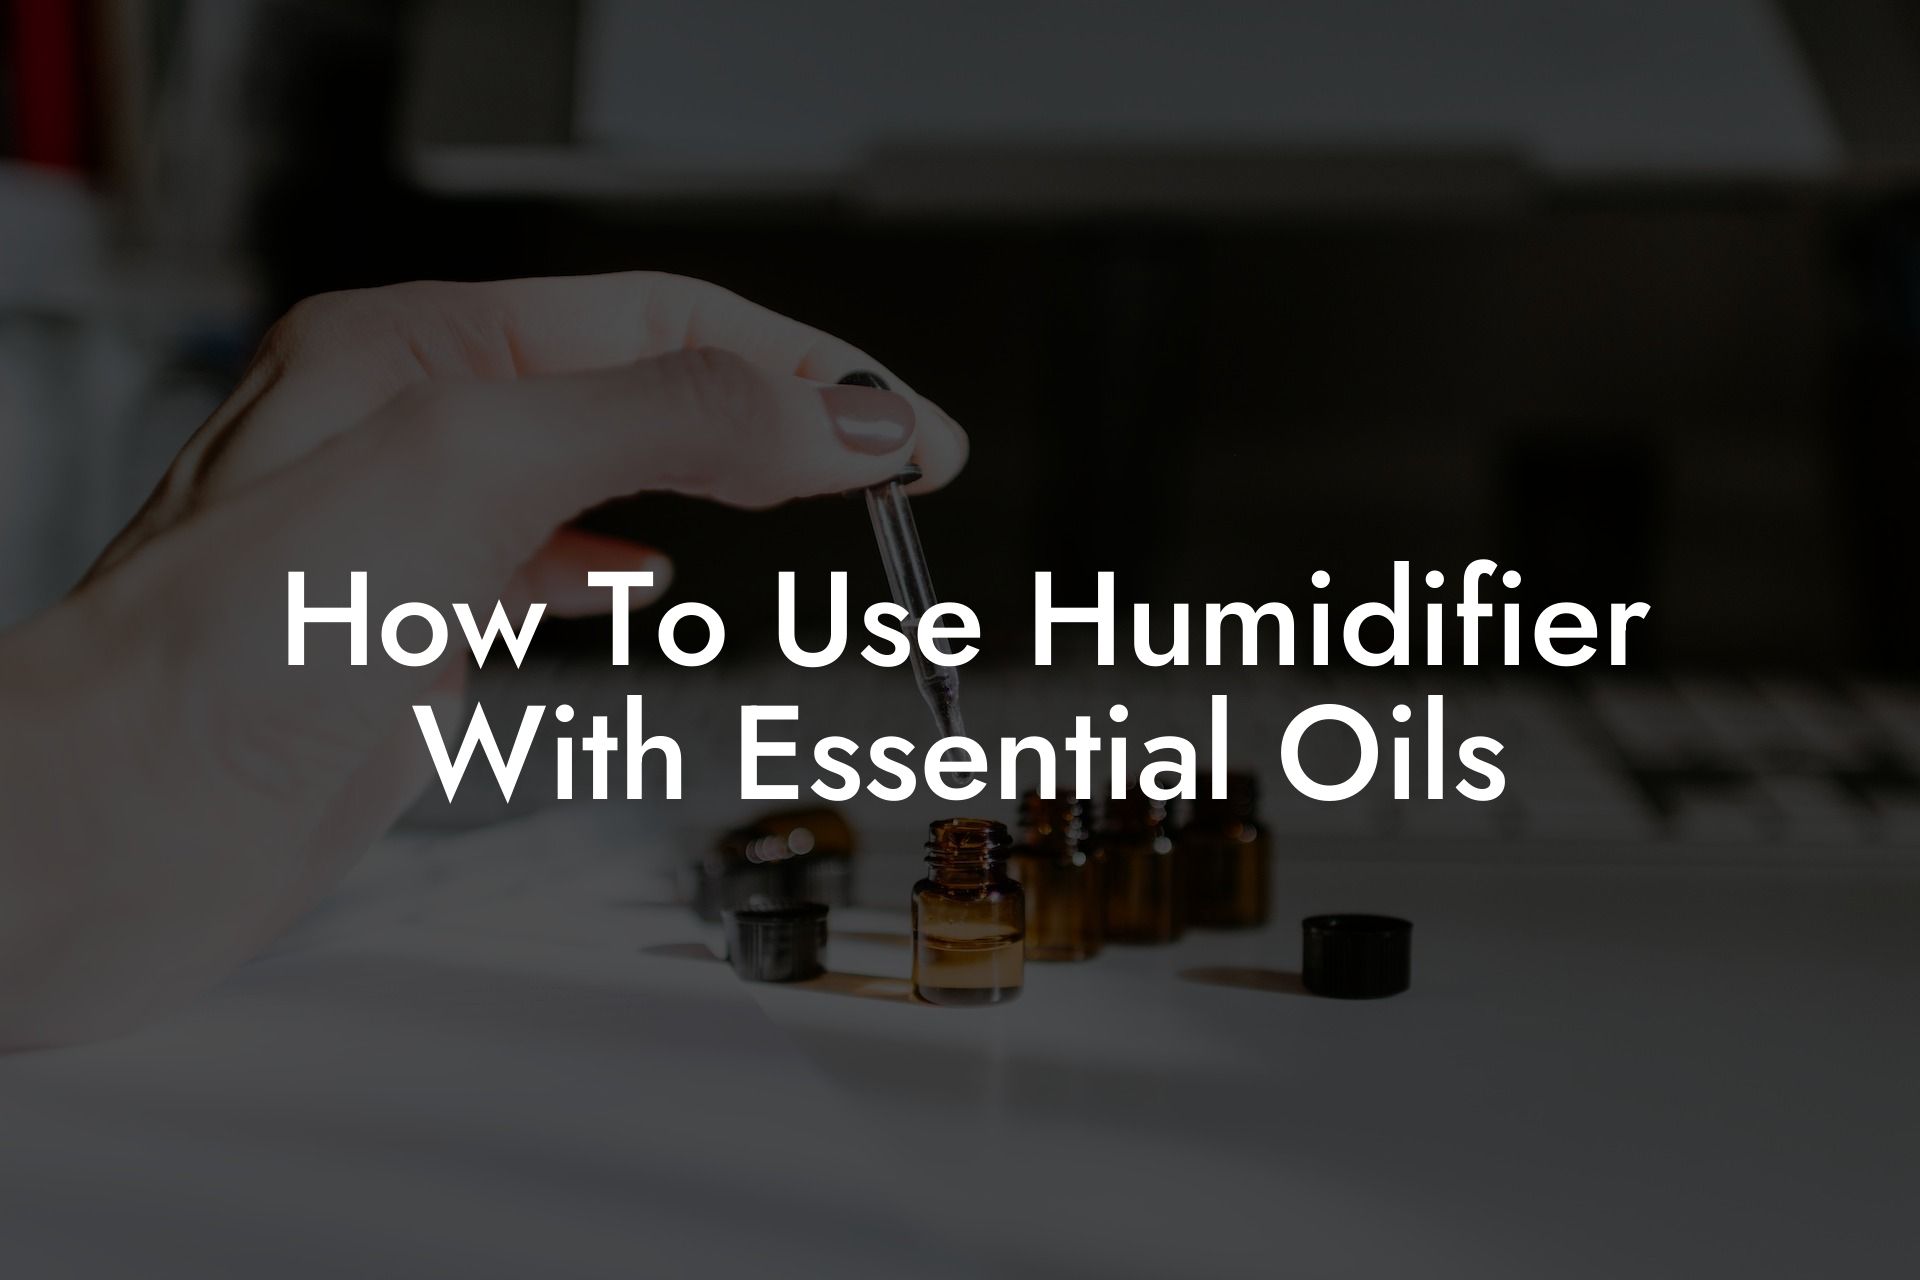 How To Use Humidifier With Essential Oils